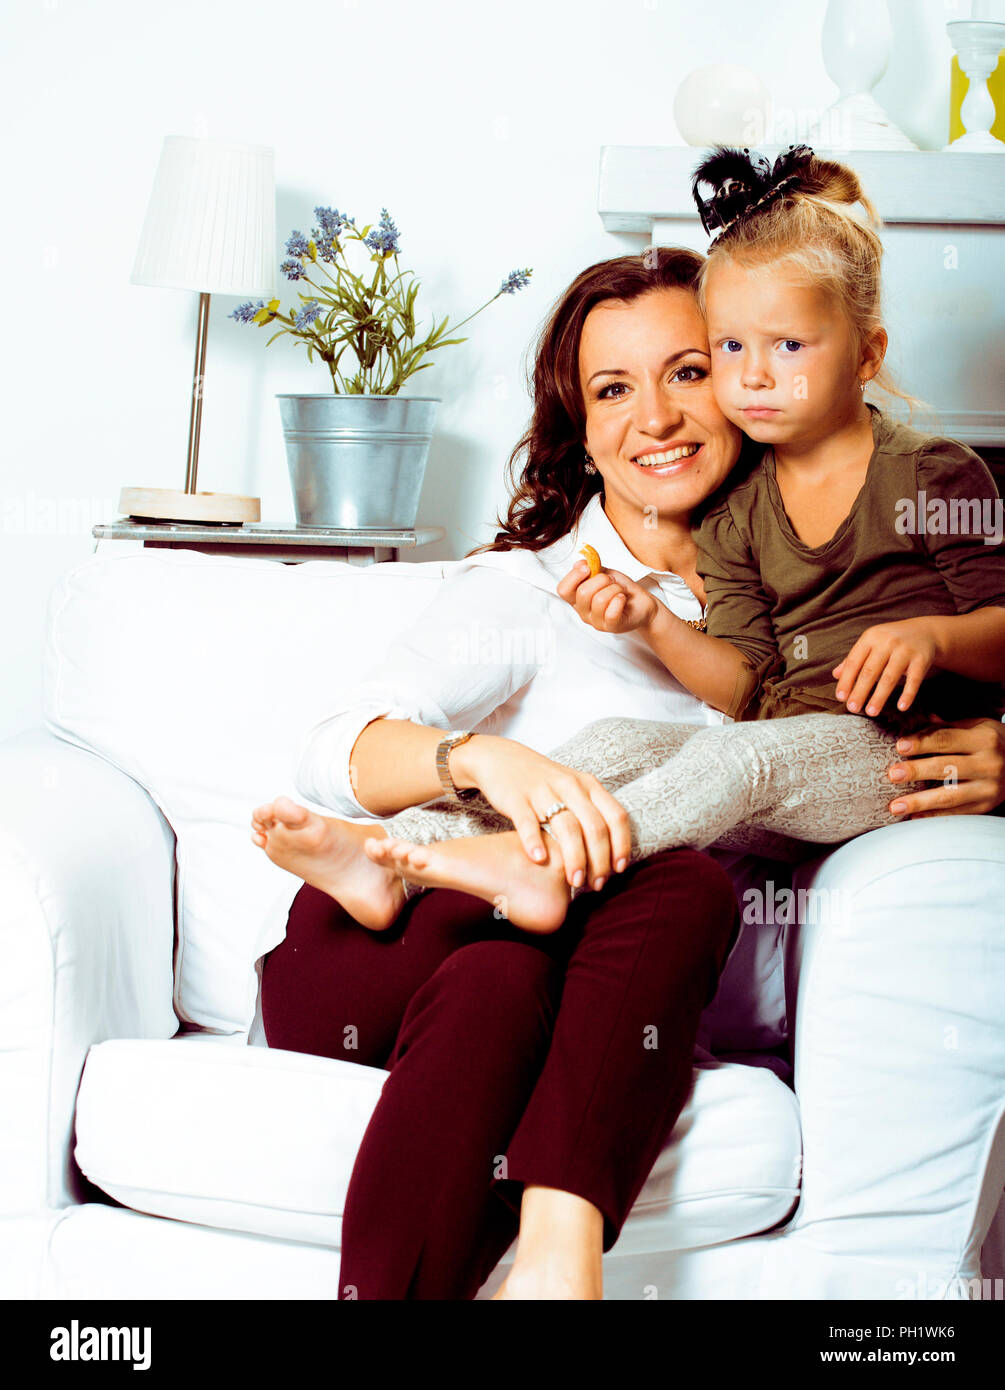 happy smiling mother with little cute daughter at home interior, Stock Photo